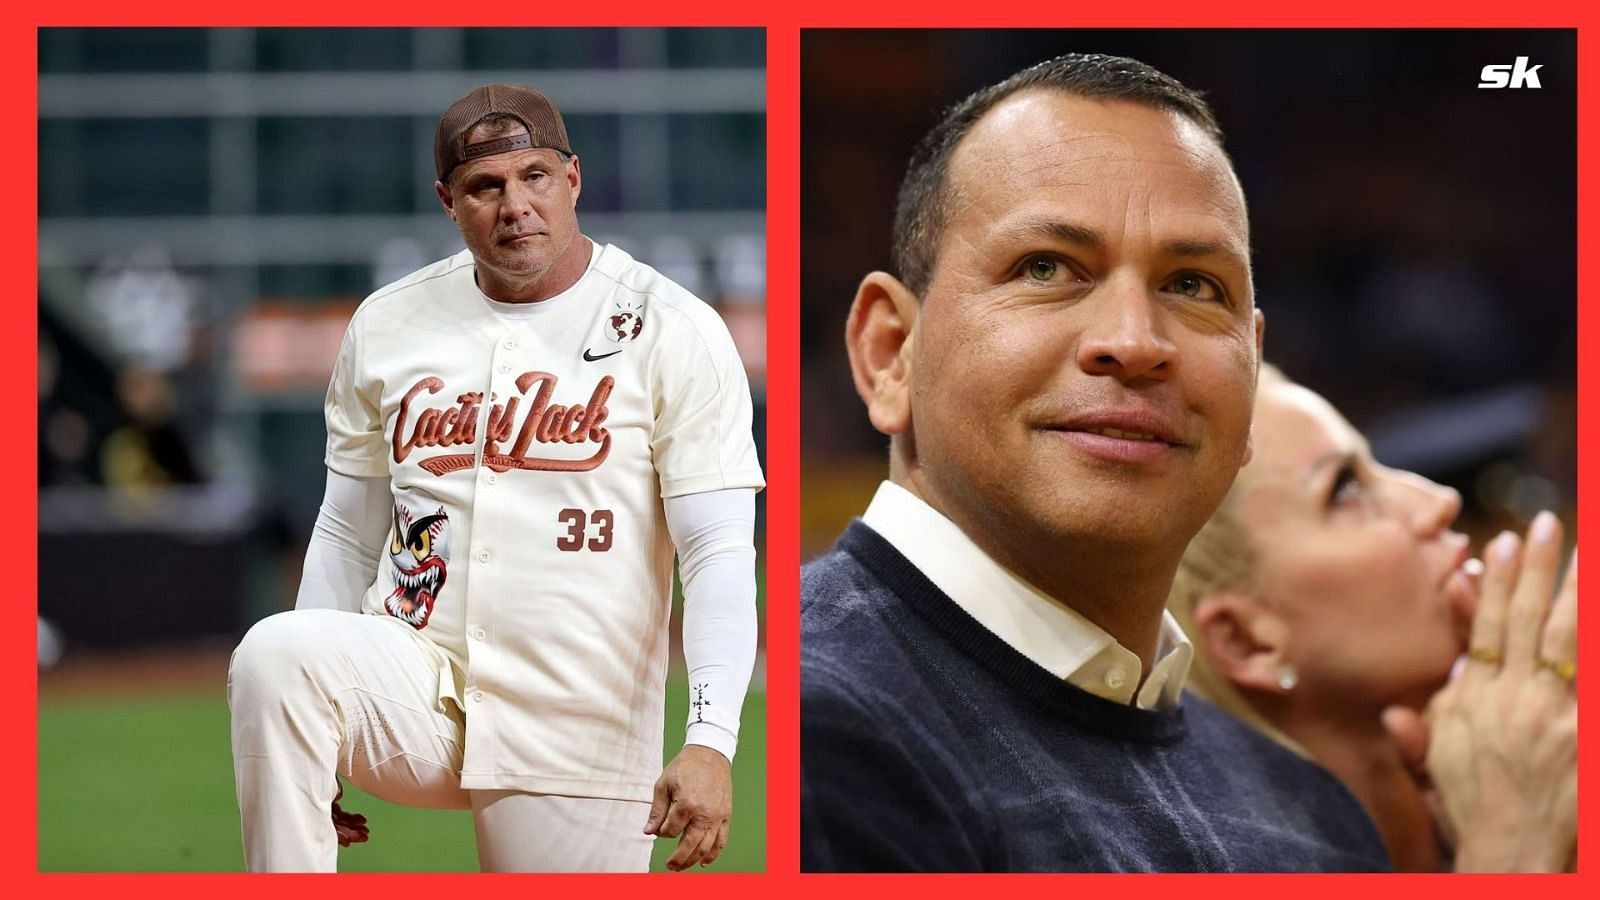 Jose Canseco once took aim at Alex Rodriguez